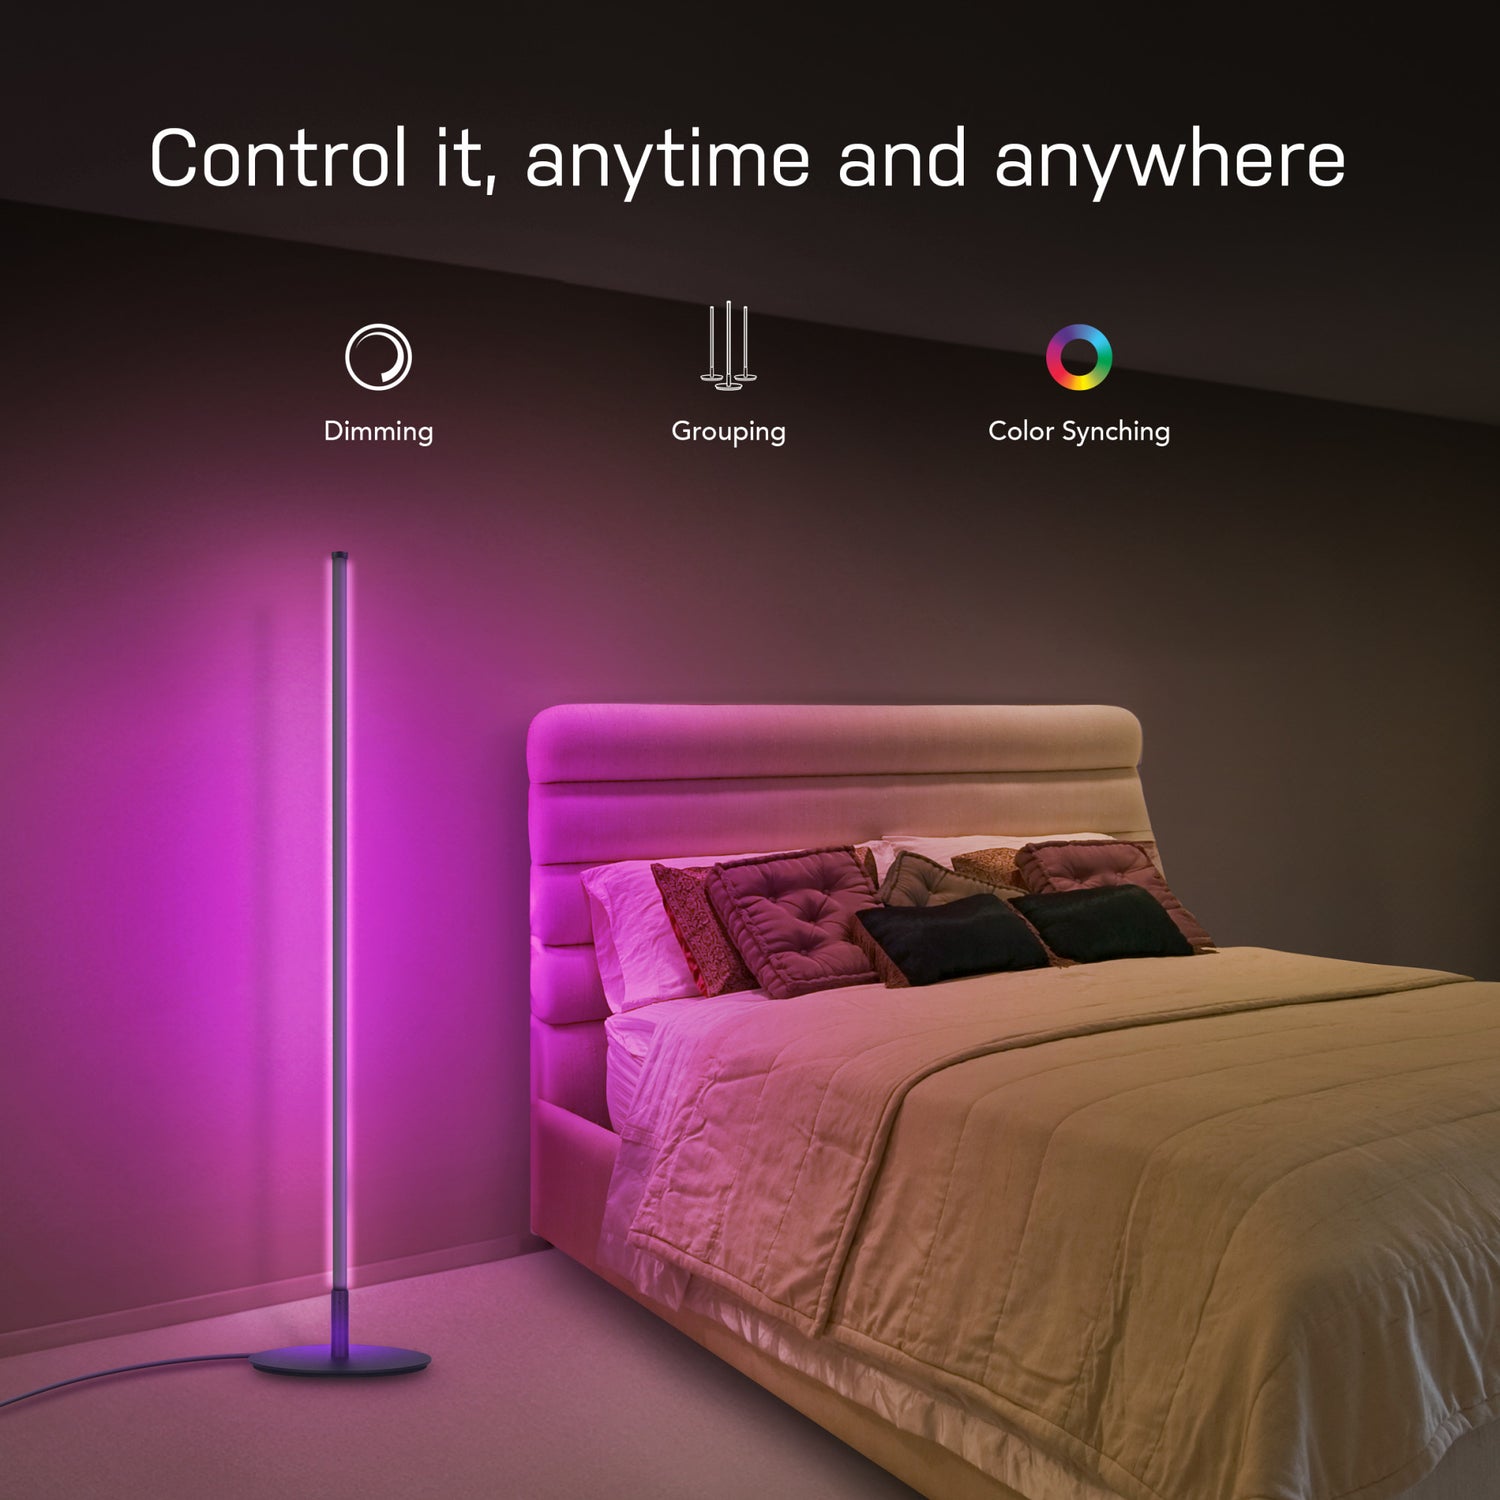 42 in. RGB Smart Wi-Fi LED Floor Lamp with Music Sync Alexa Google